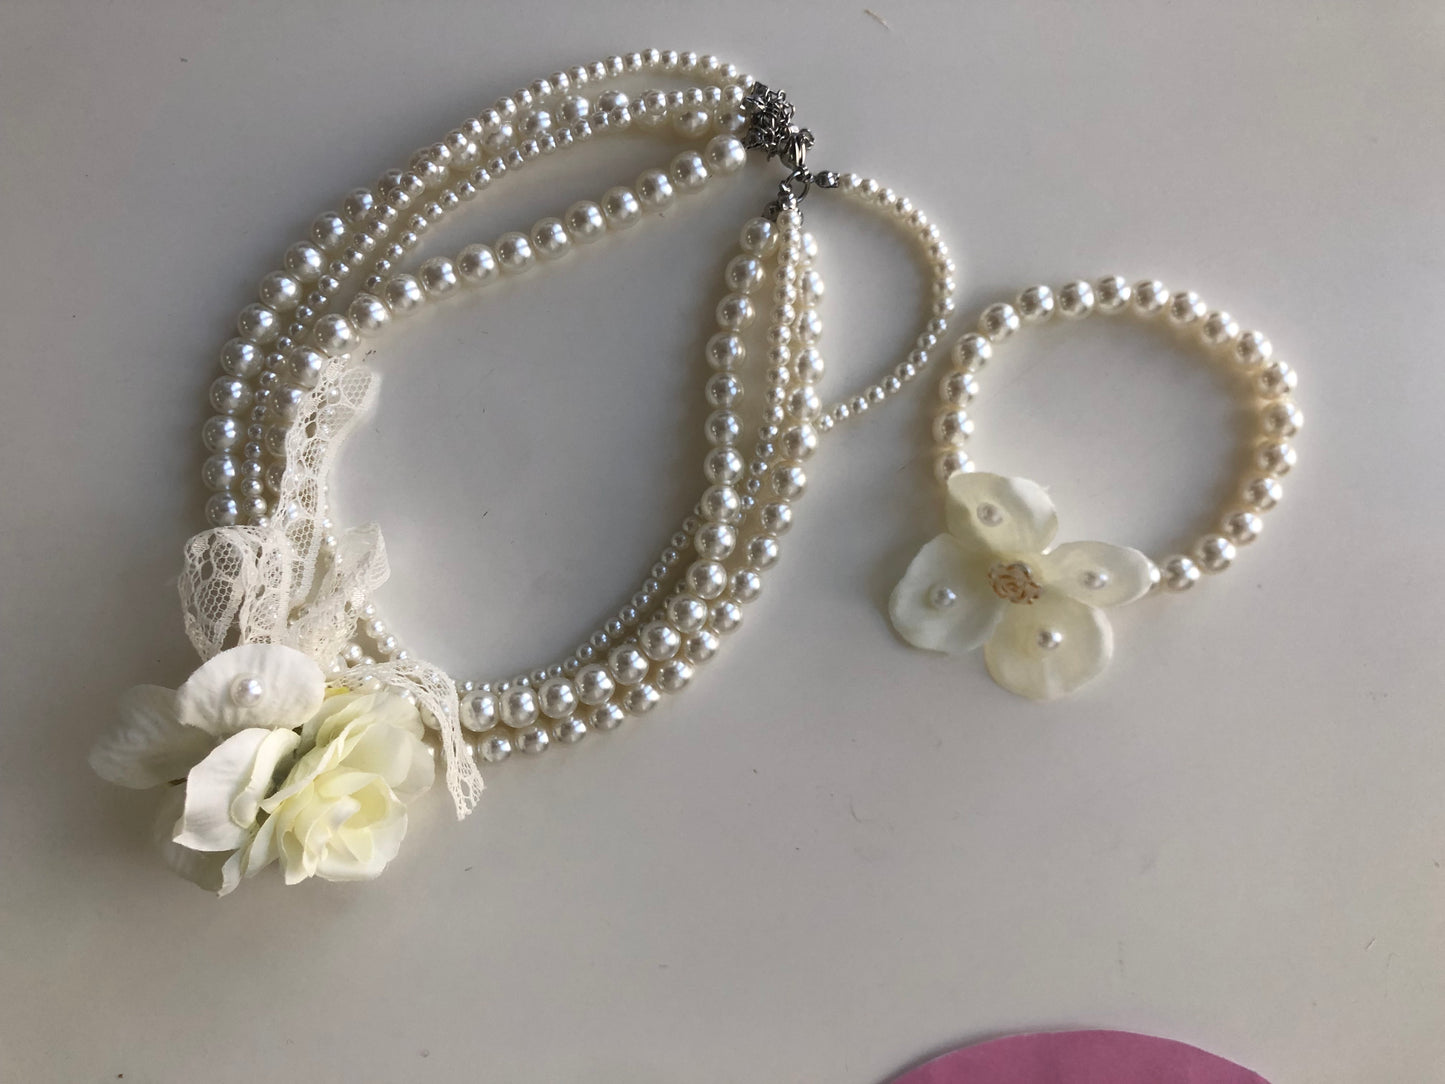 Handmade HimeLolita Artificial Pearl Floral Necklace and Bracelet Set by nbsamalolita